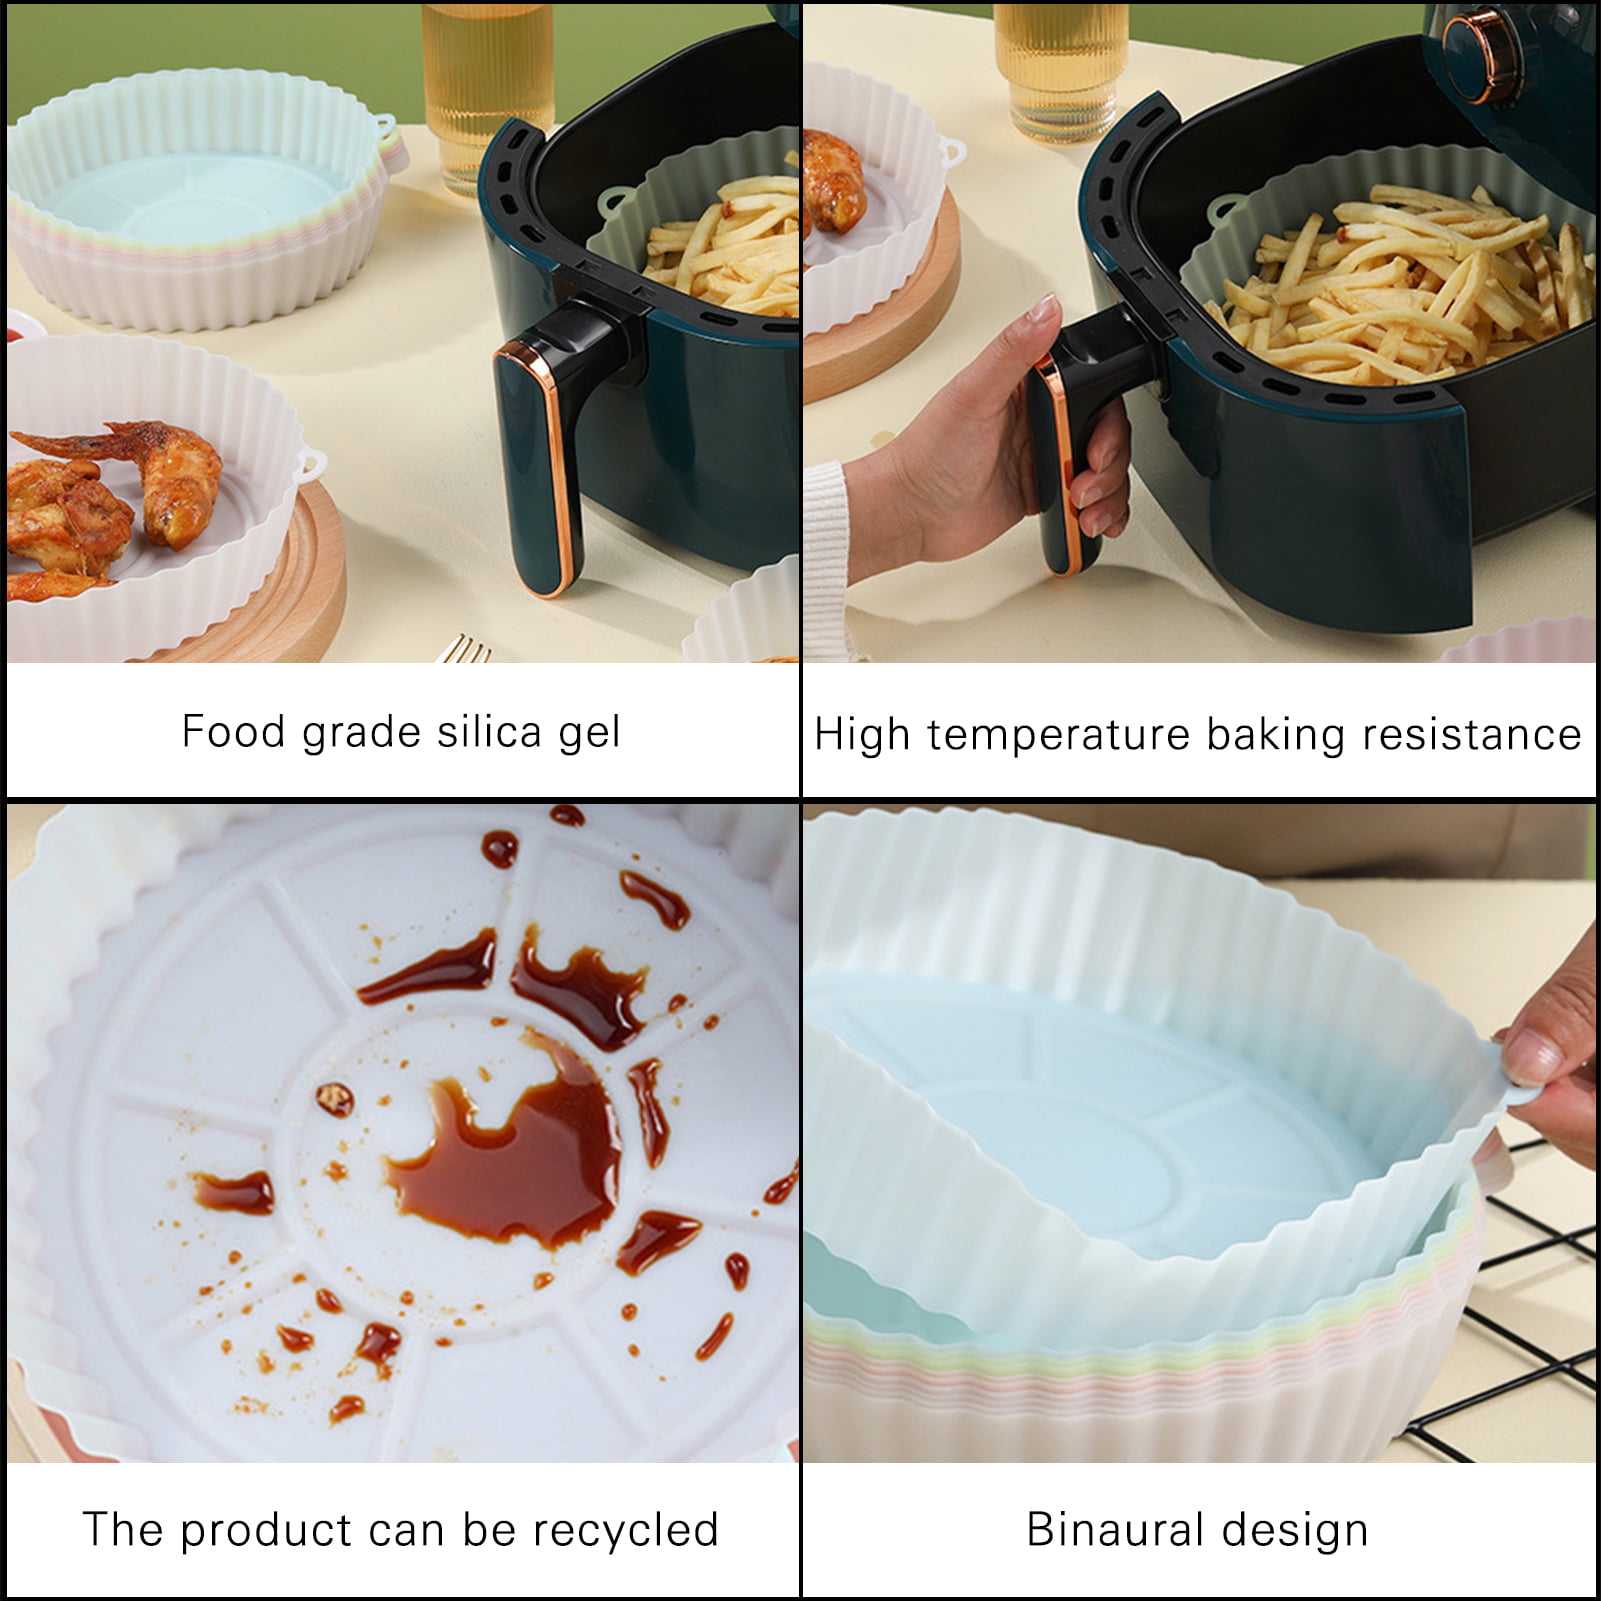 Evjurcn 2pcs Air Fryer Silicone Pot with Handle Reusable Air Fryer Liner Heat Resistant Air Fryer Silicone Basket 7.87 inch Round Baking Pan Air Fryer